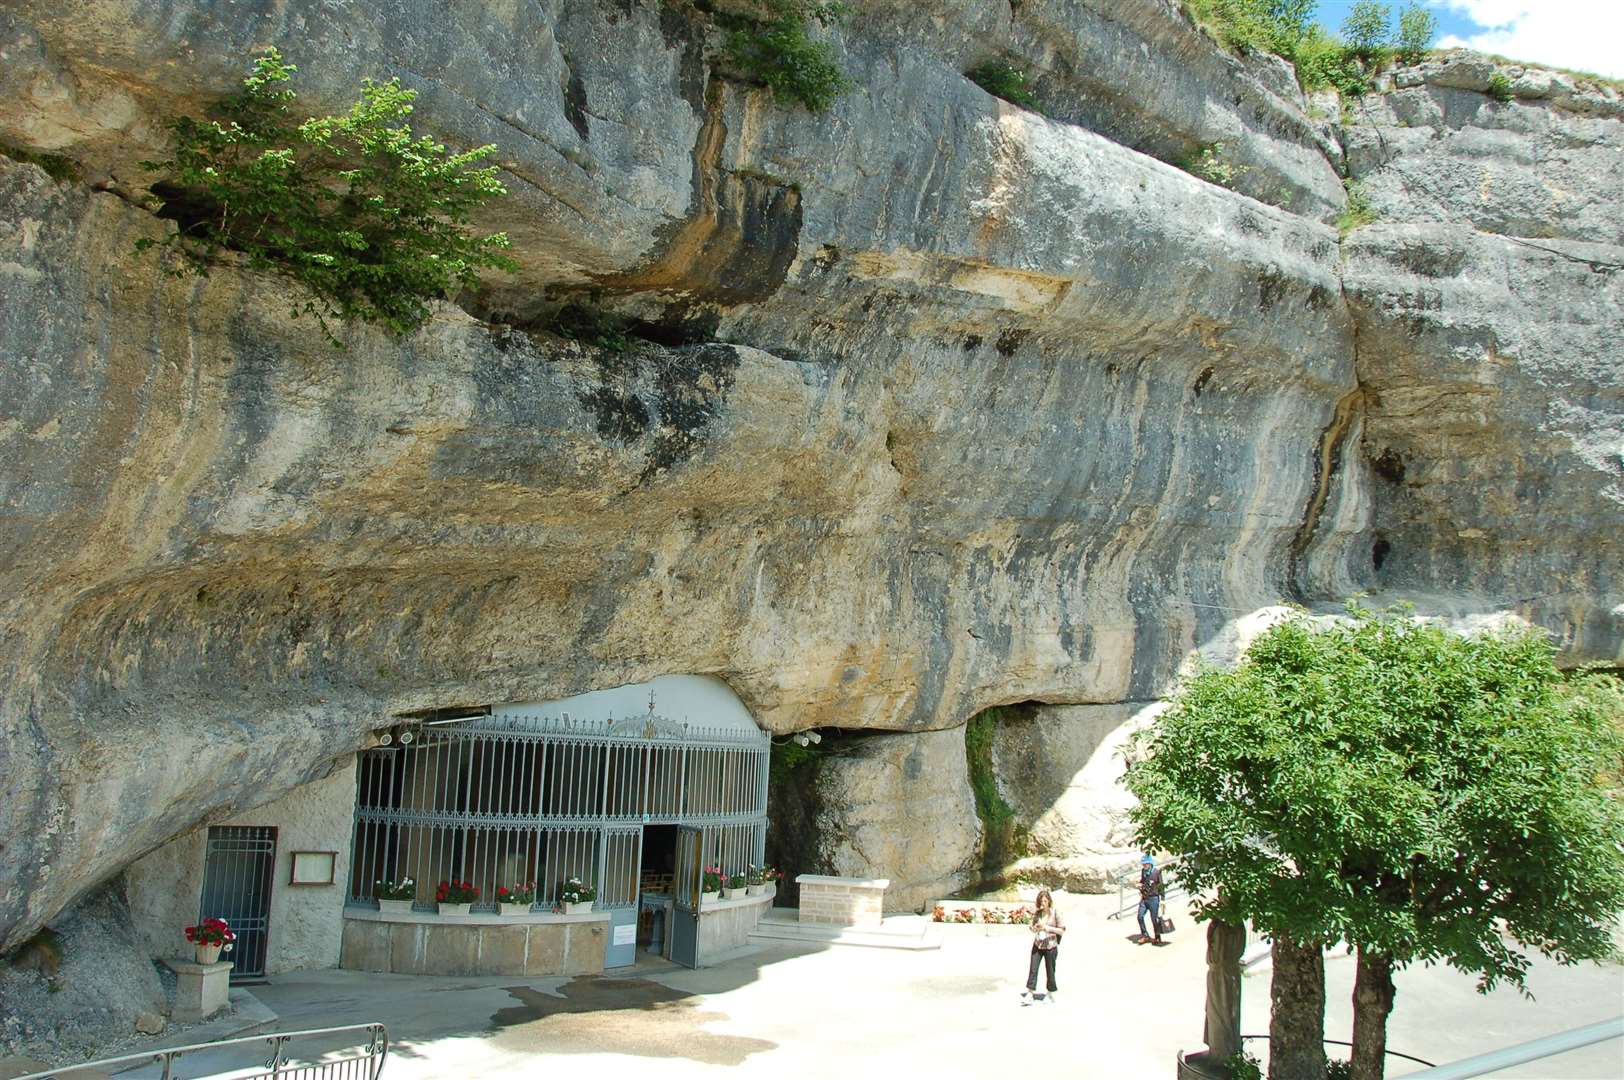 The church built into a cave and water source, Grotte de Remonot, Les Combs.